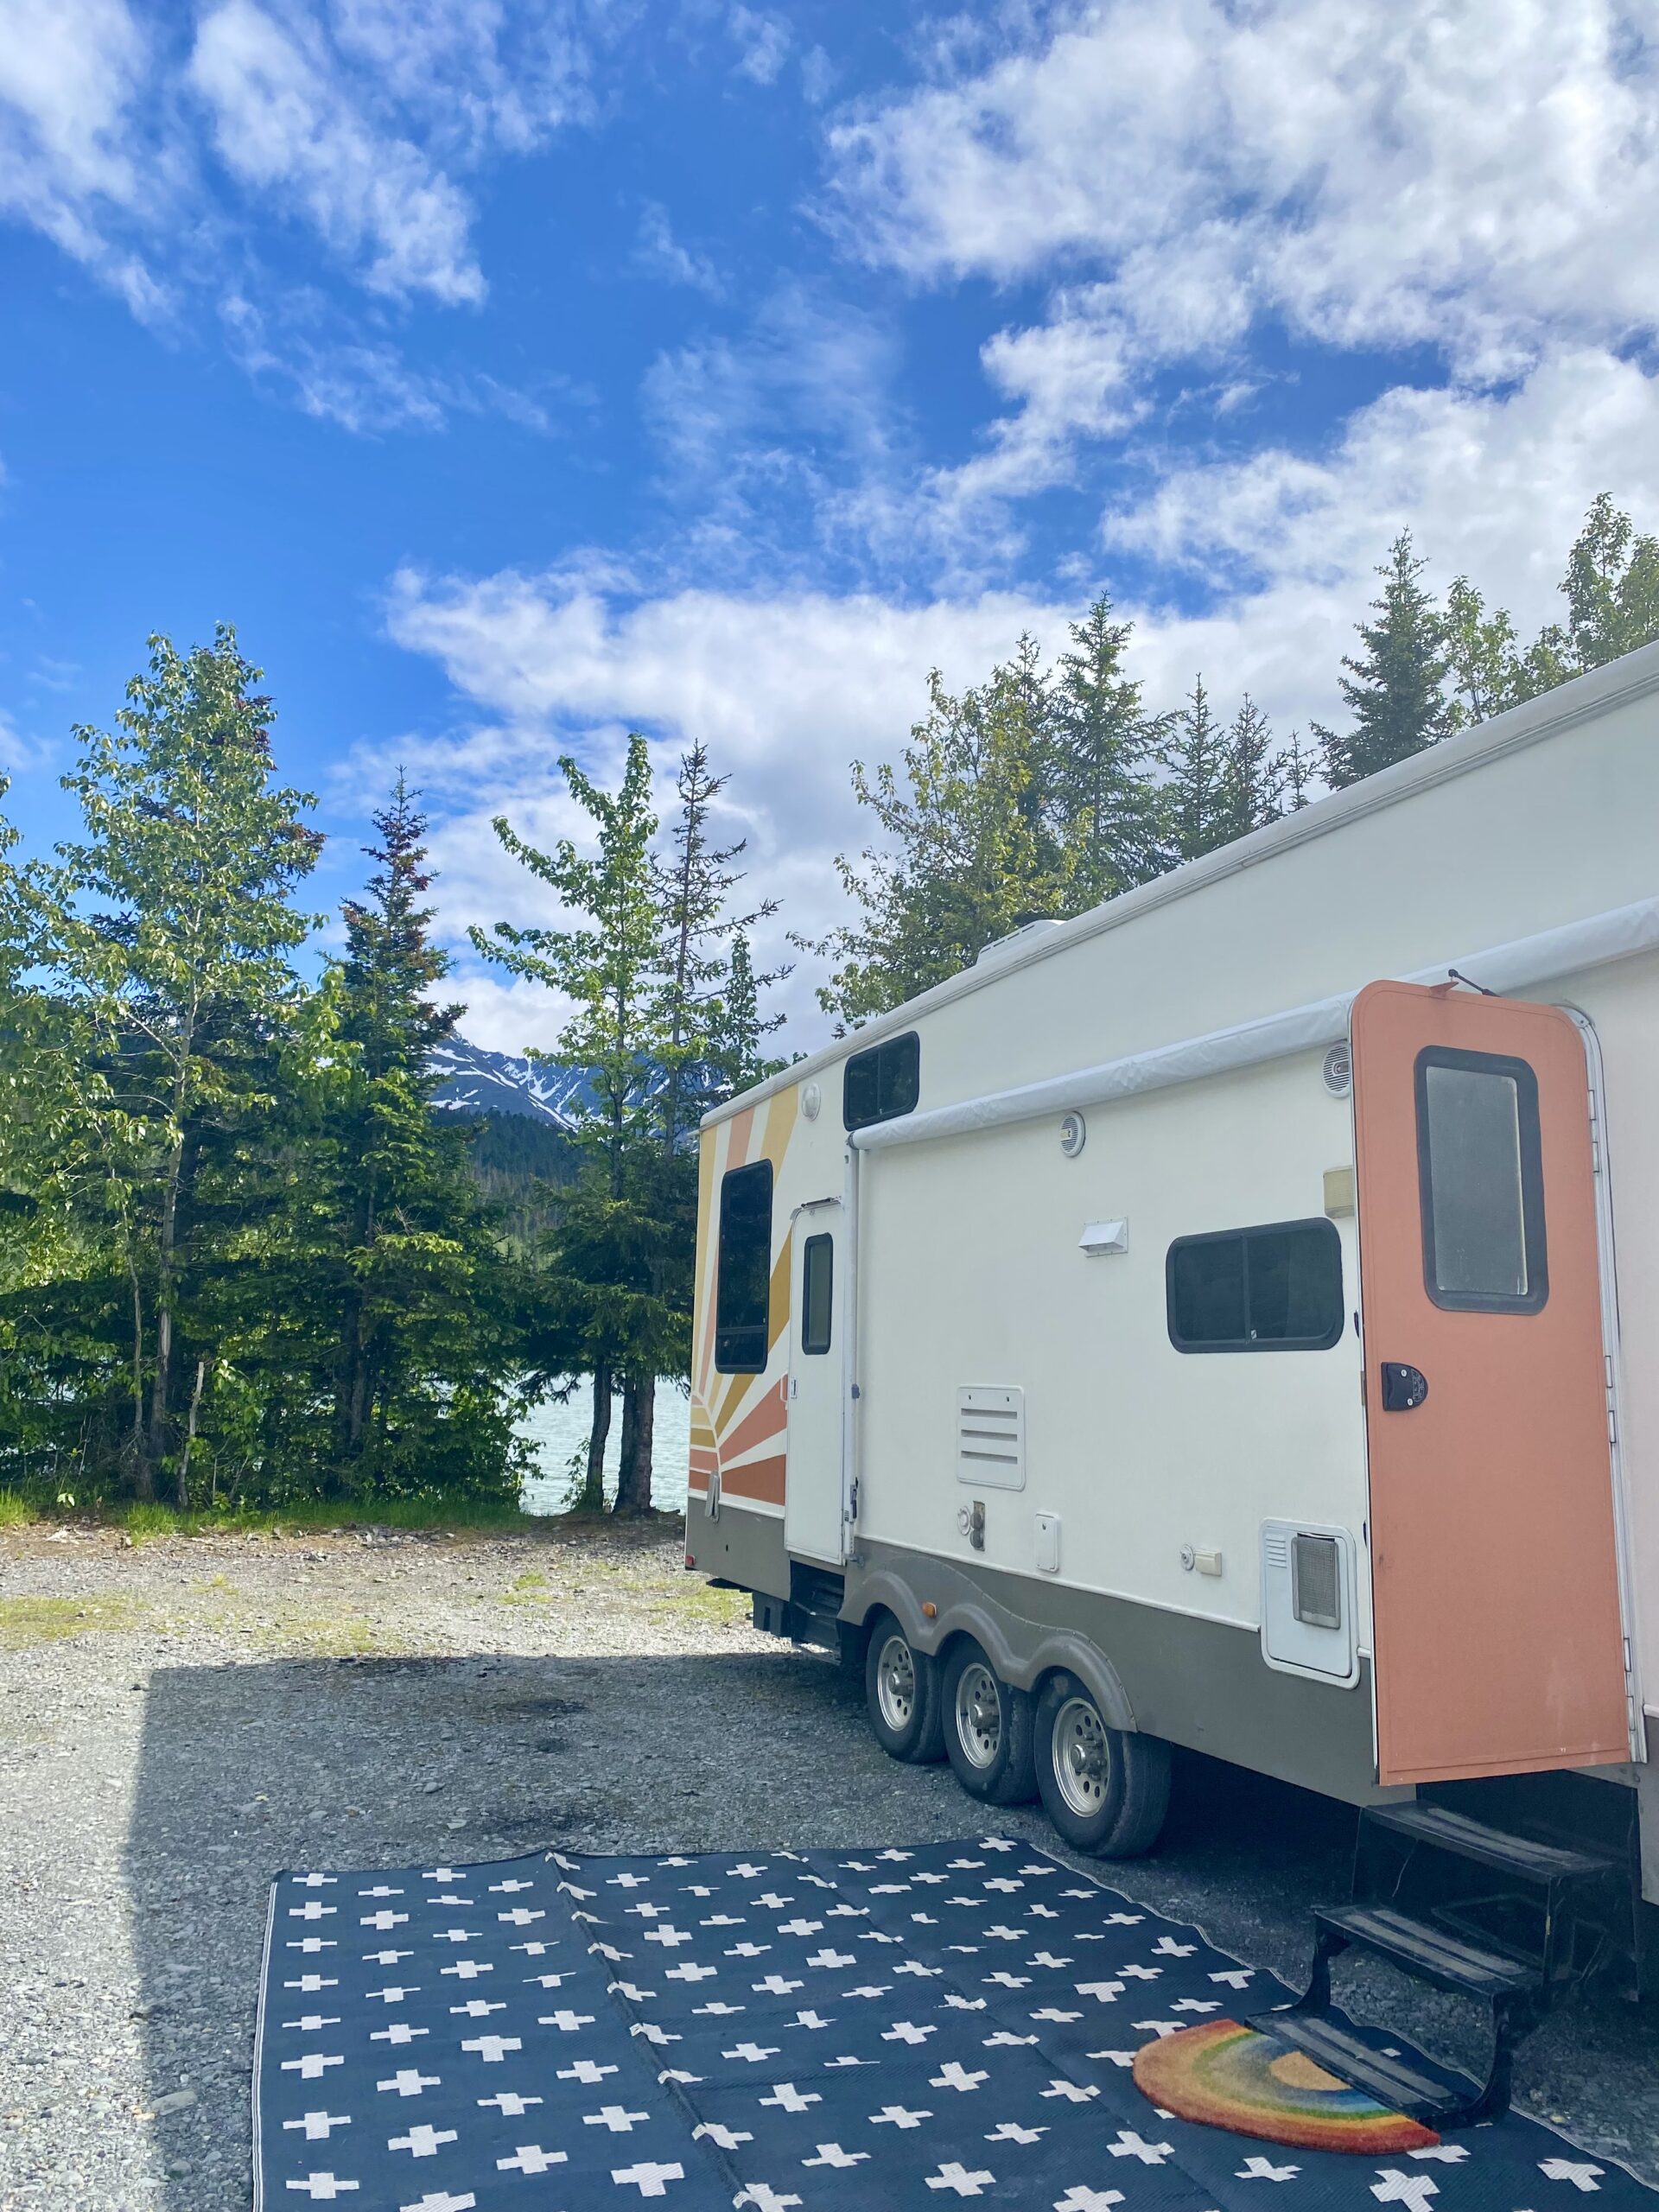 RV Camping Alaska | Fifth Wheel RV is parked at Upper Trail Lake in Moose Pass, Alaska | Blue skies and trees overlooking Upper Trail Lake